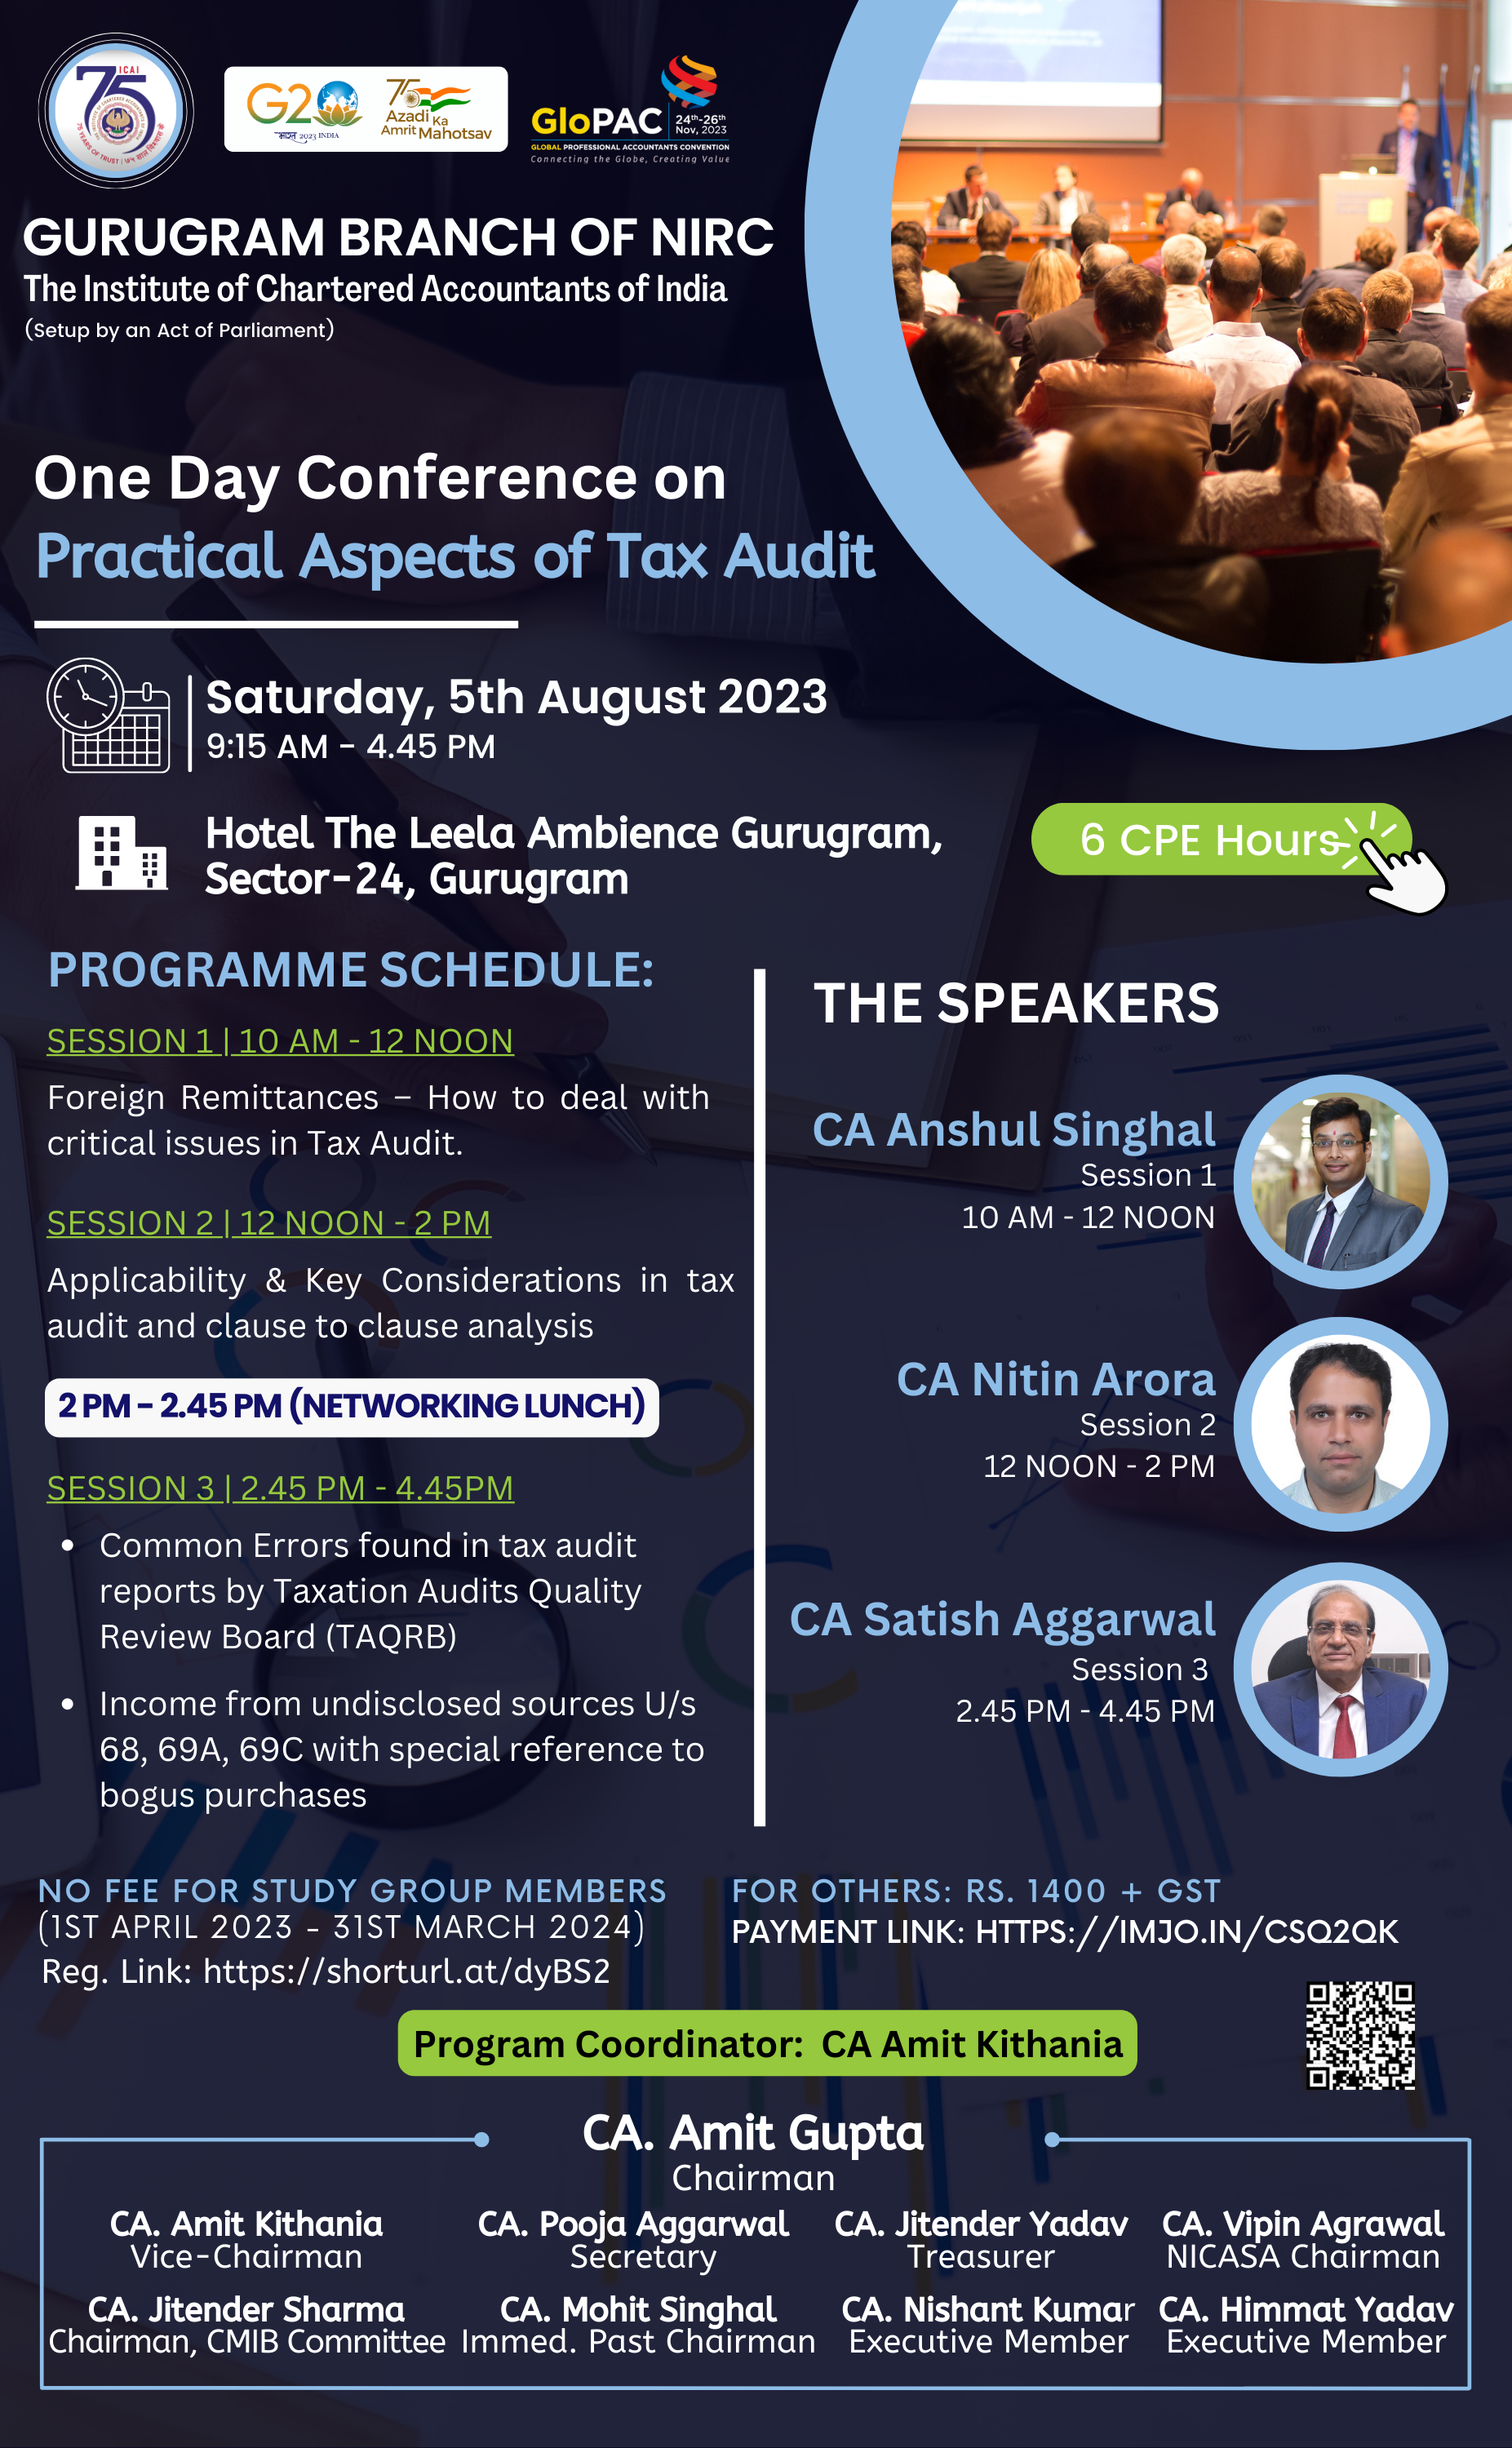 One Day Conference on Practical Aspects of Tax Audit